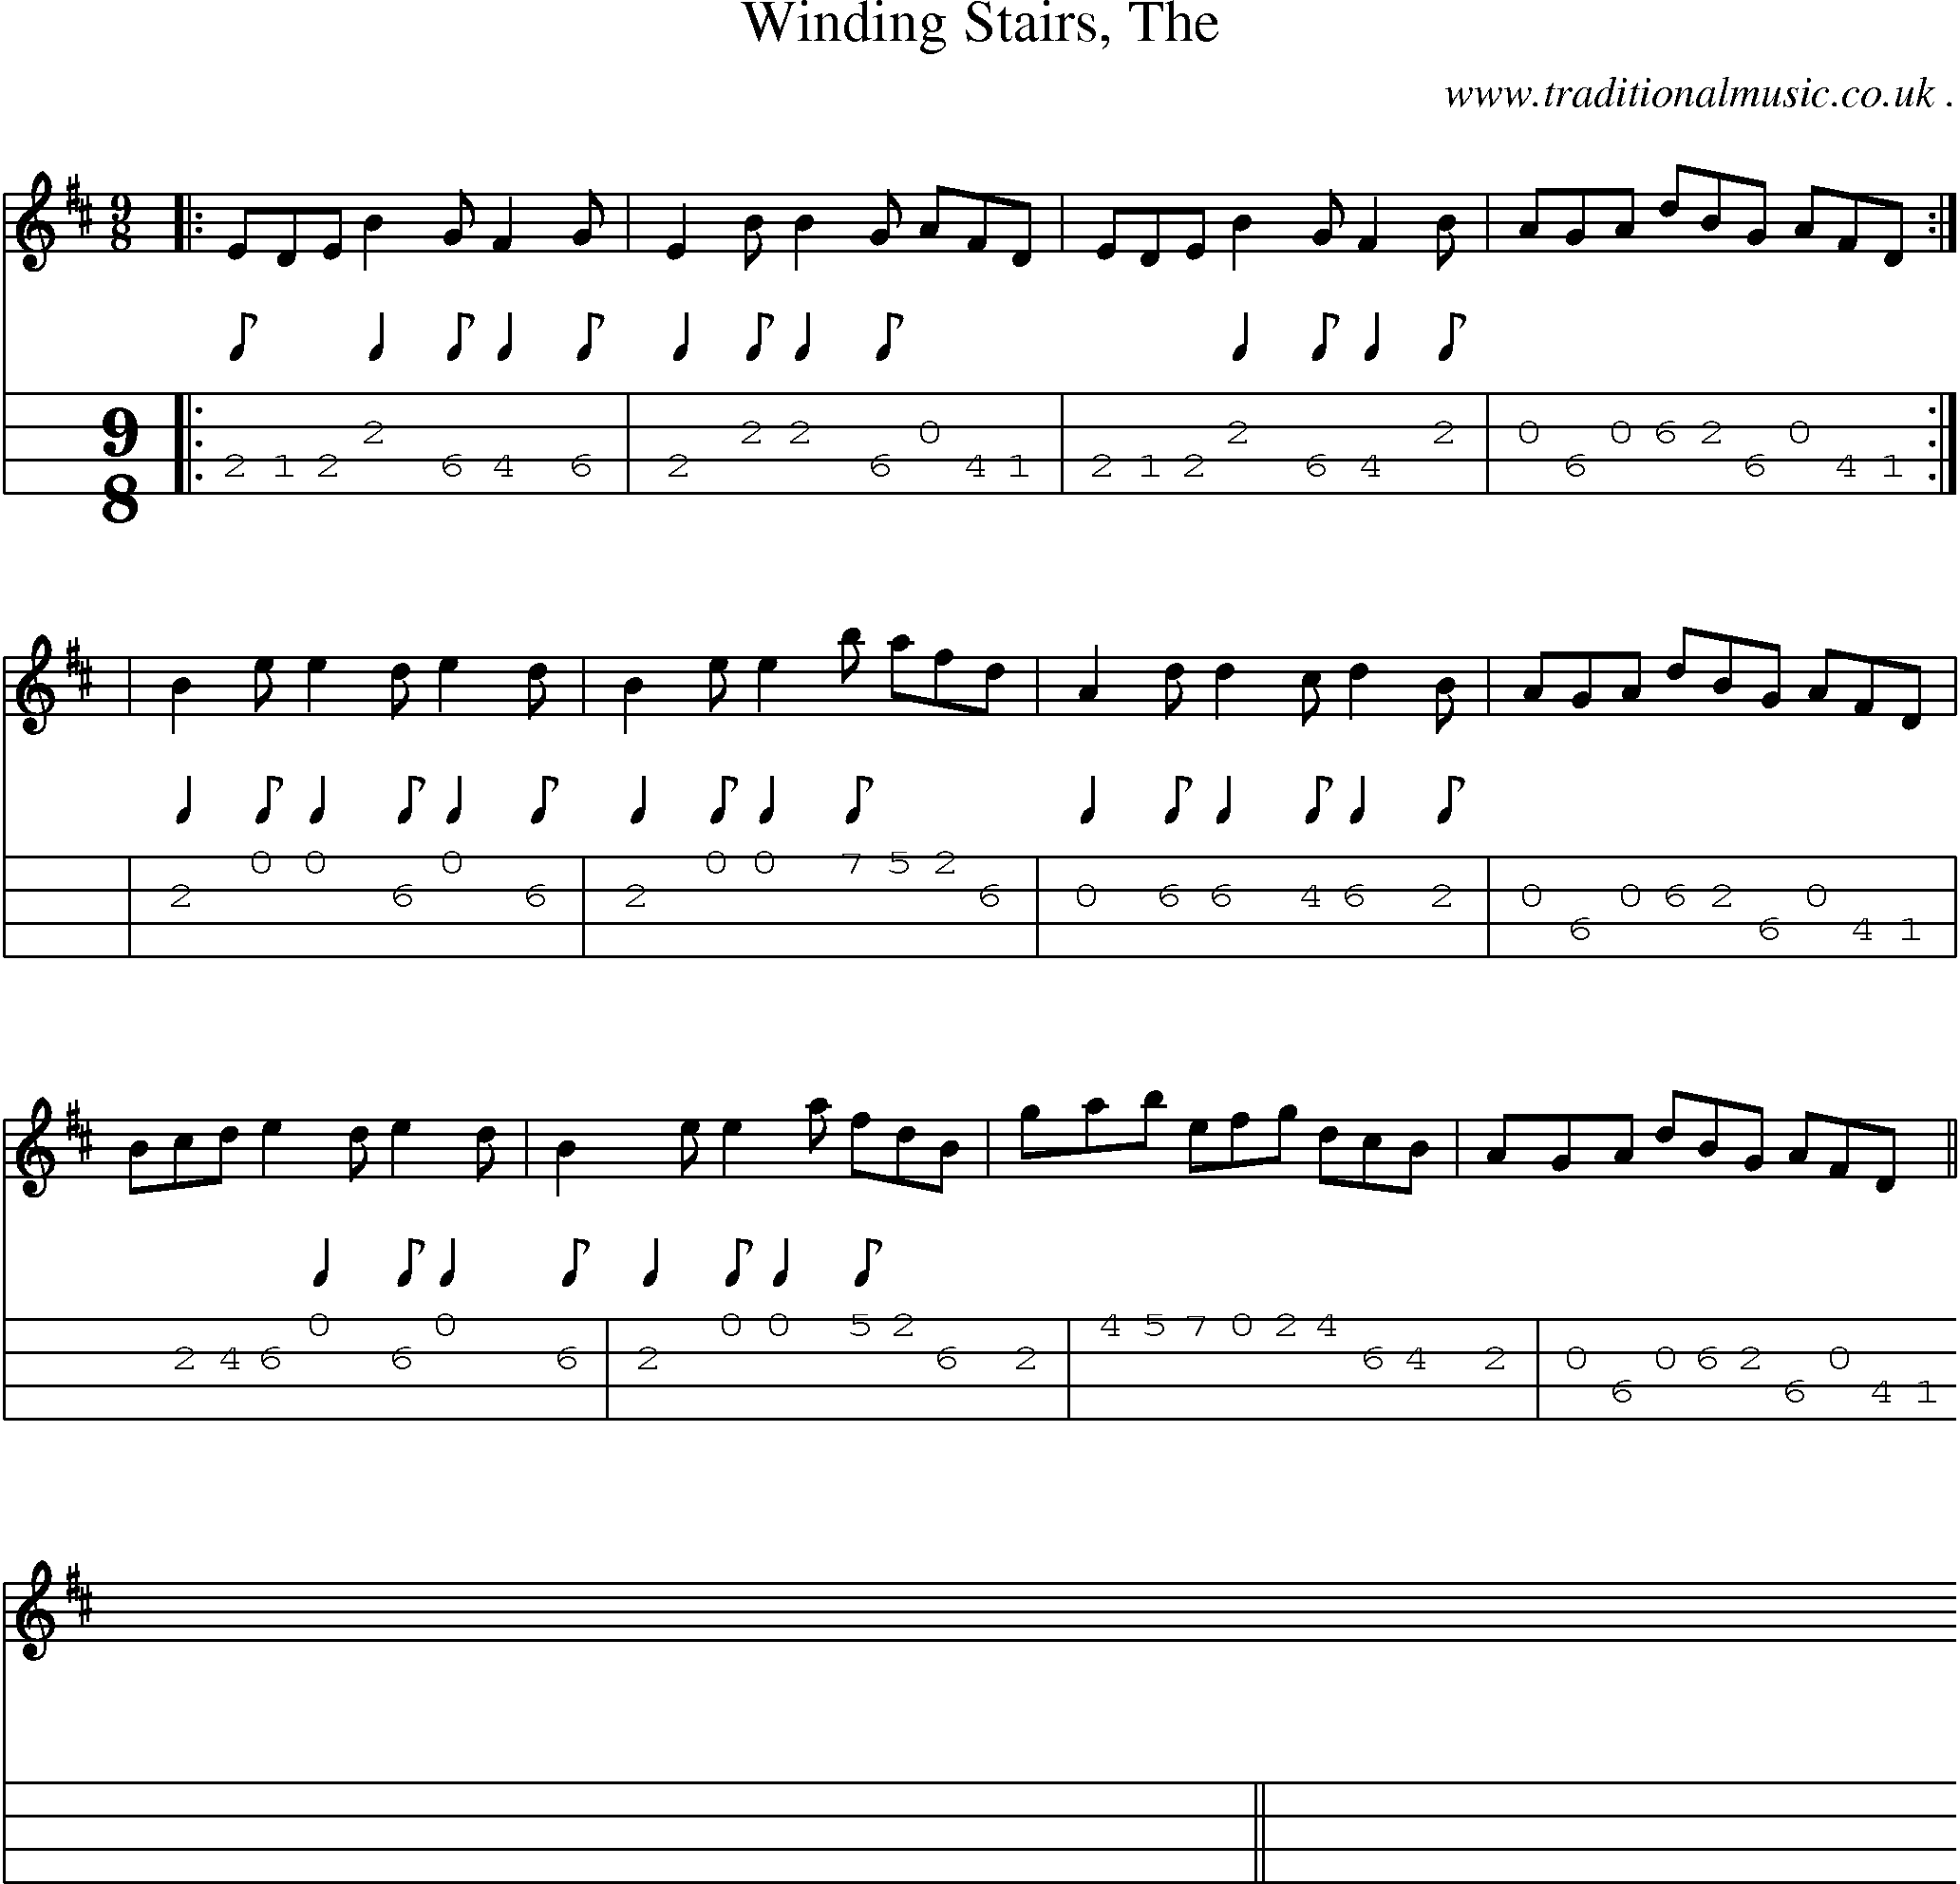 Sheet-music  score, Chords and Mandolin Tabs for Winding Stairs The